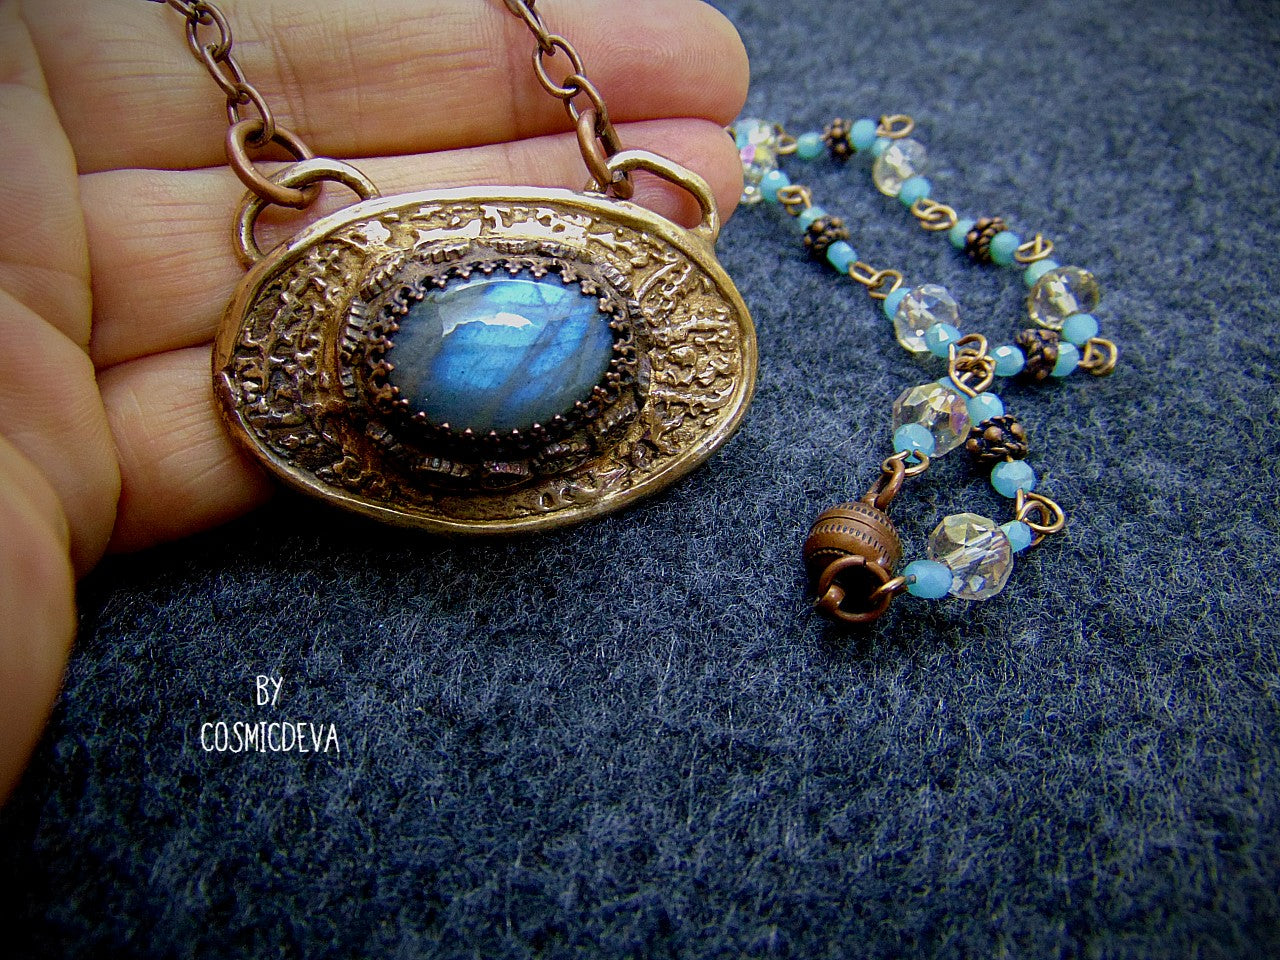 This necklace features a stunning blue labradorite set in a bezel setting, adding a touch of flash to your ensemble